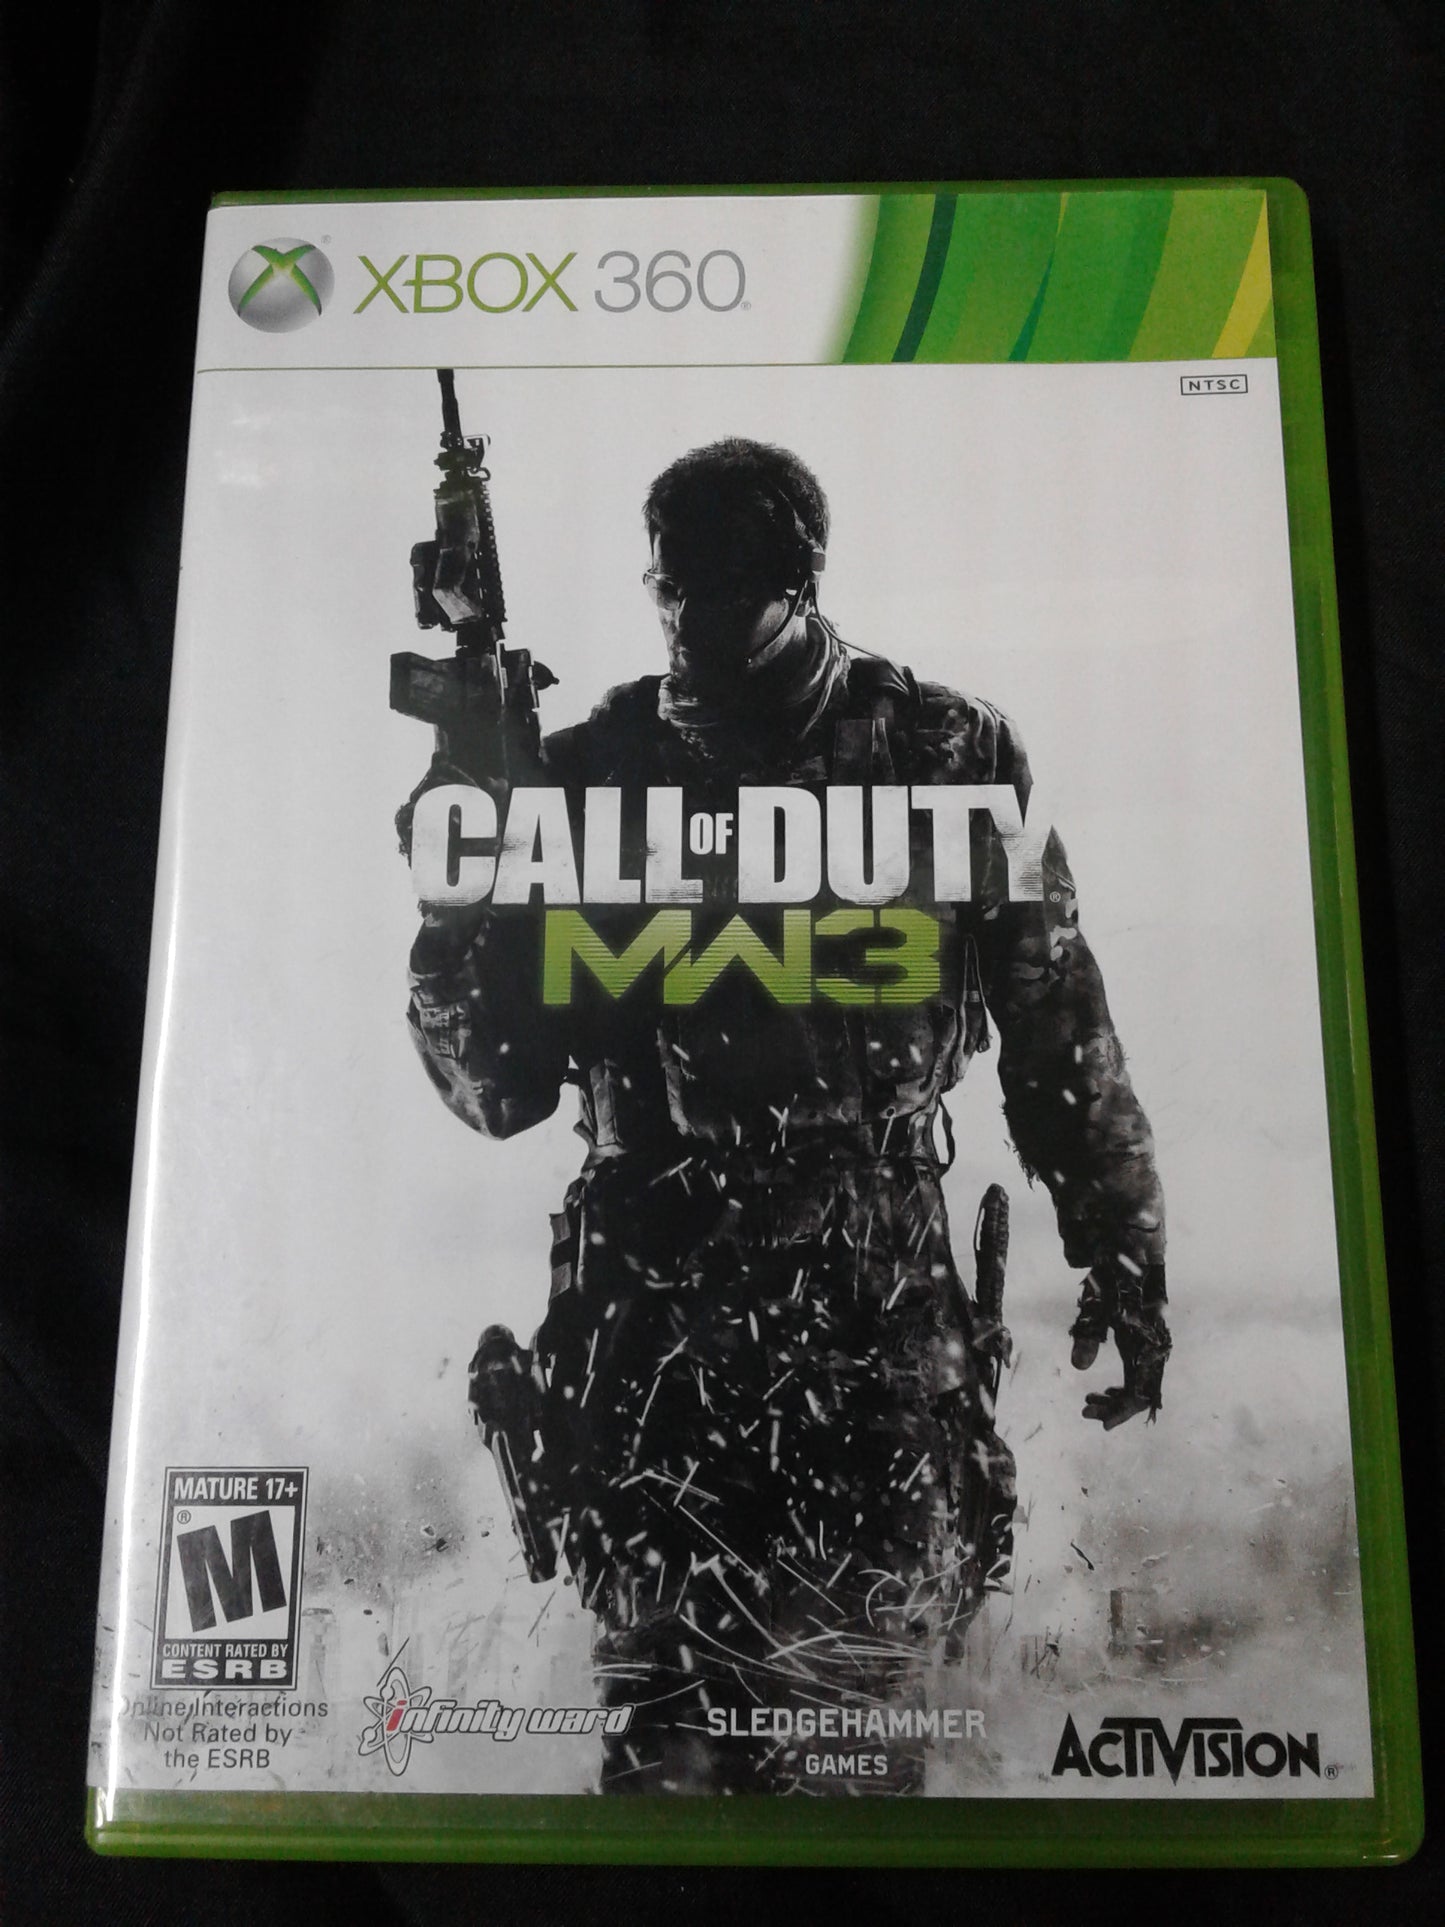 XBox 360 Call of duty MM3